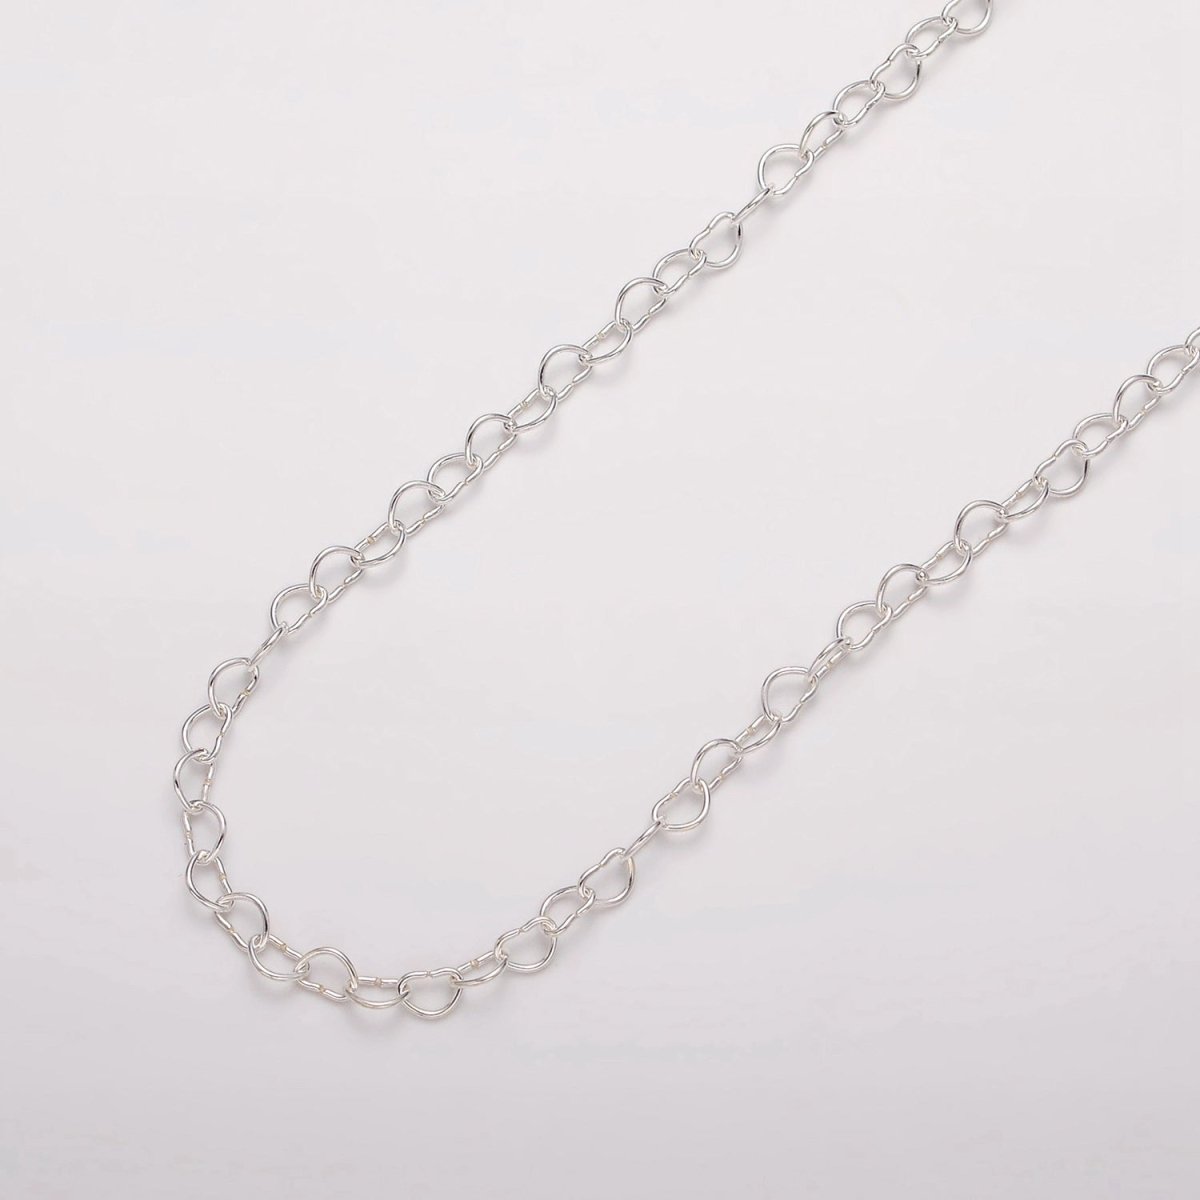 2.8mm Heart Chain - 925 sterling silver Heart Cable Chain Wholesale Jewelry Making for Necklace Bracelet Anklet Permanent Jewelry Supply ROLL-1485 - DLUXCA